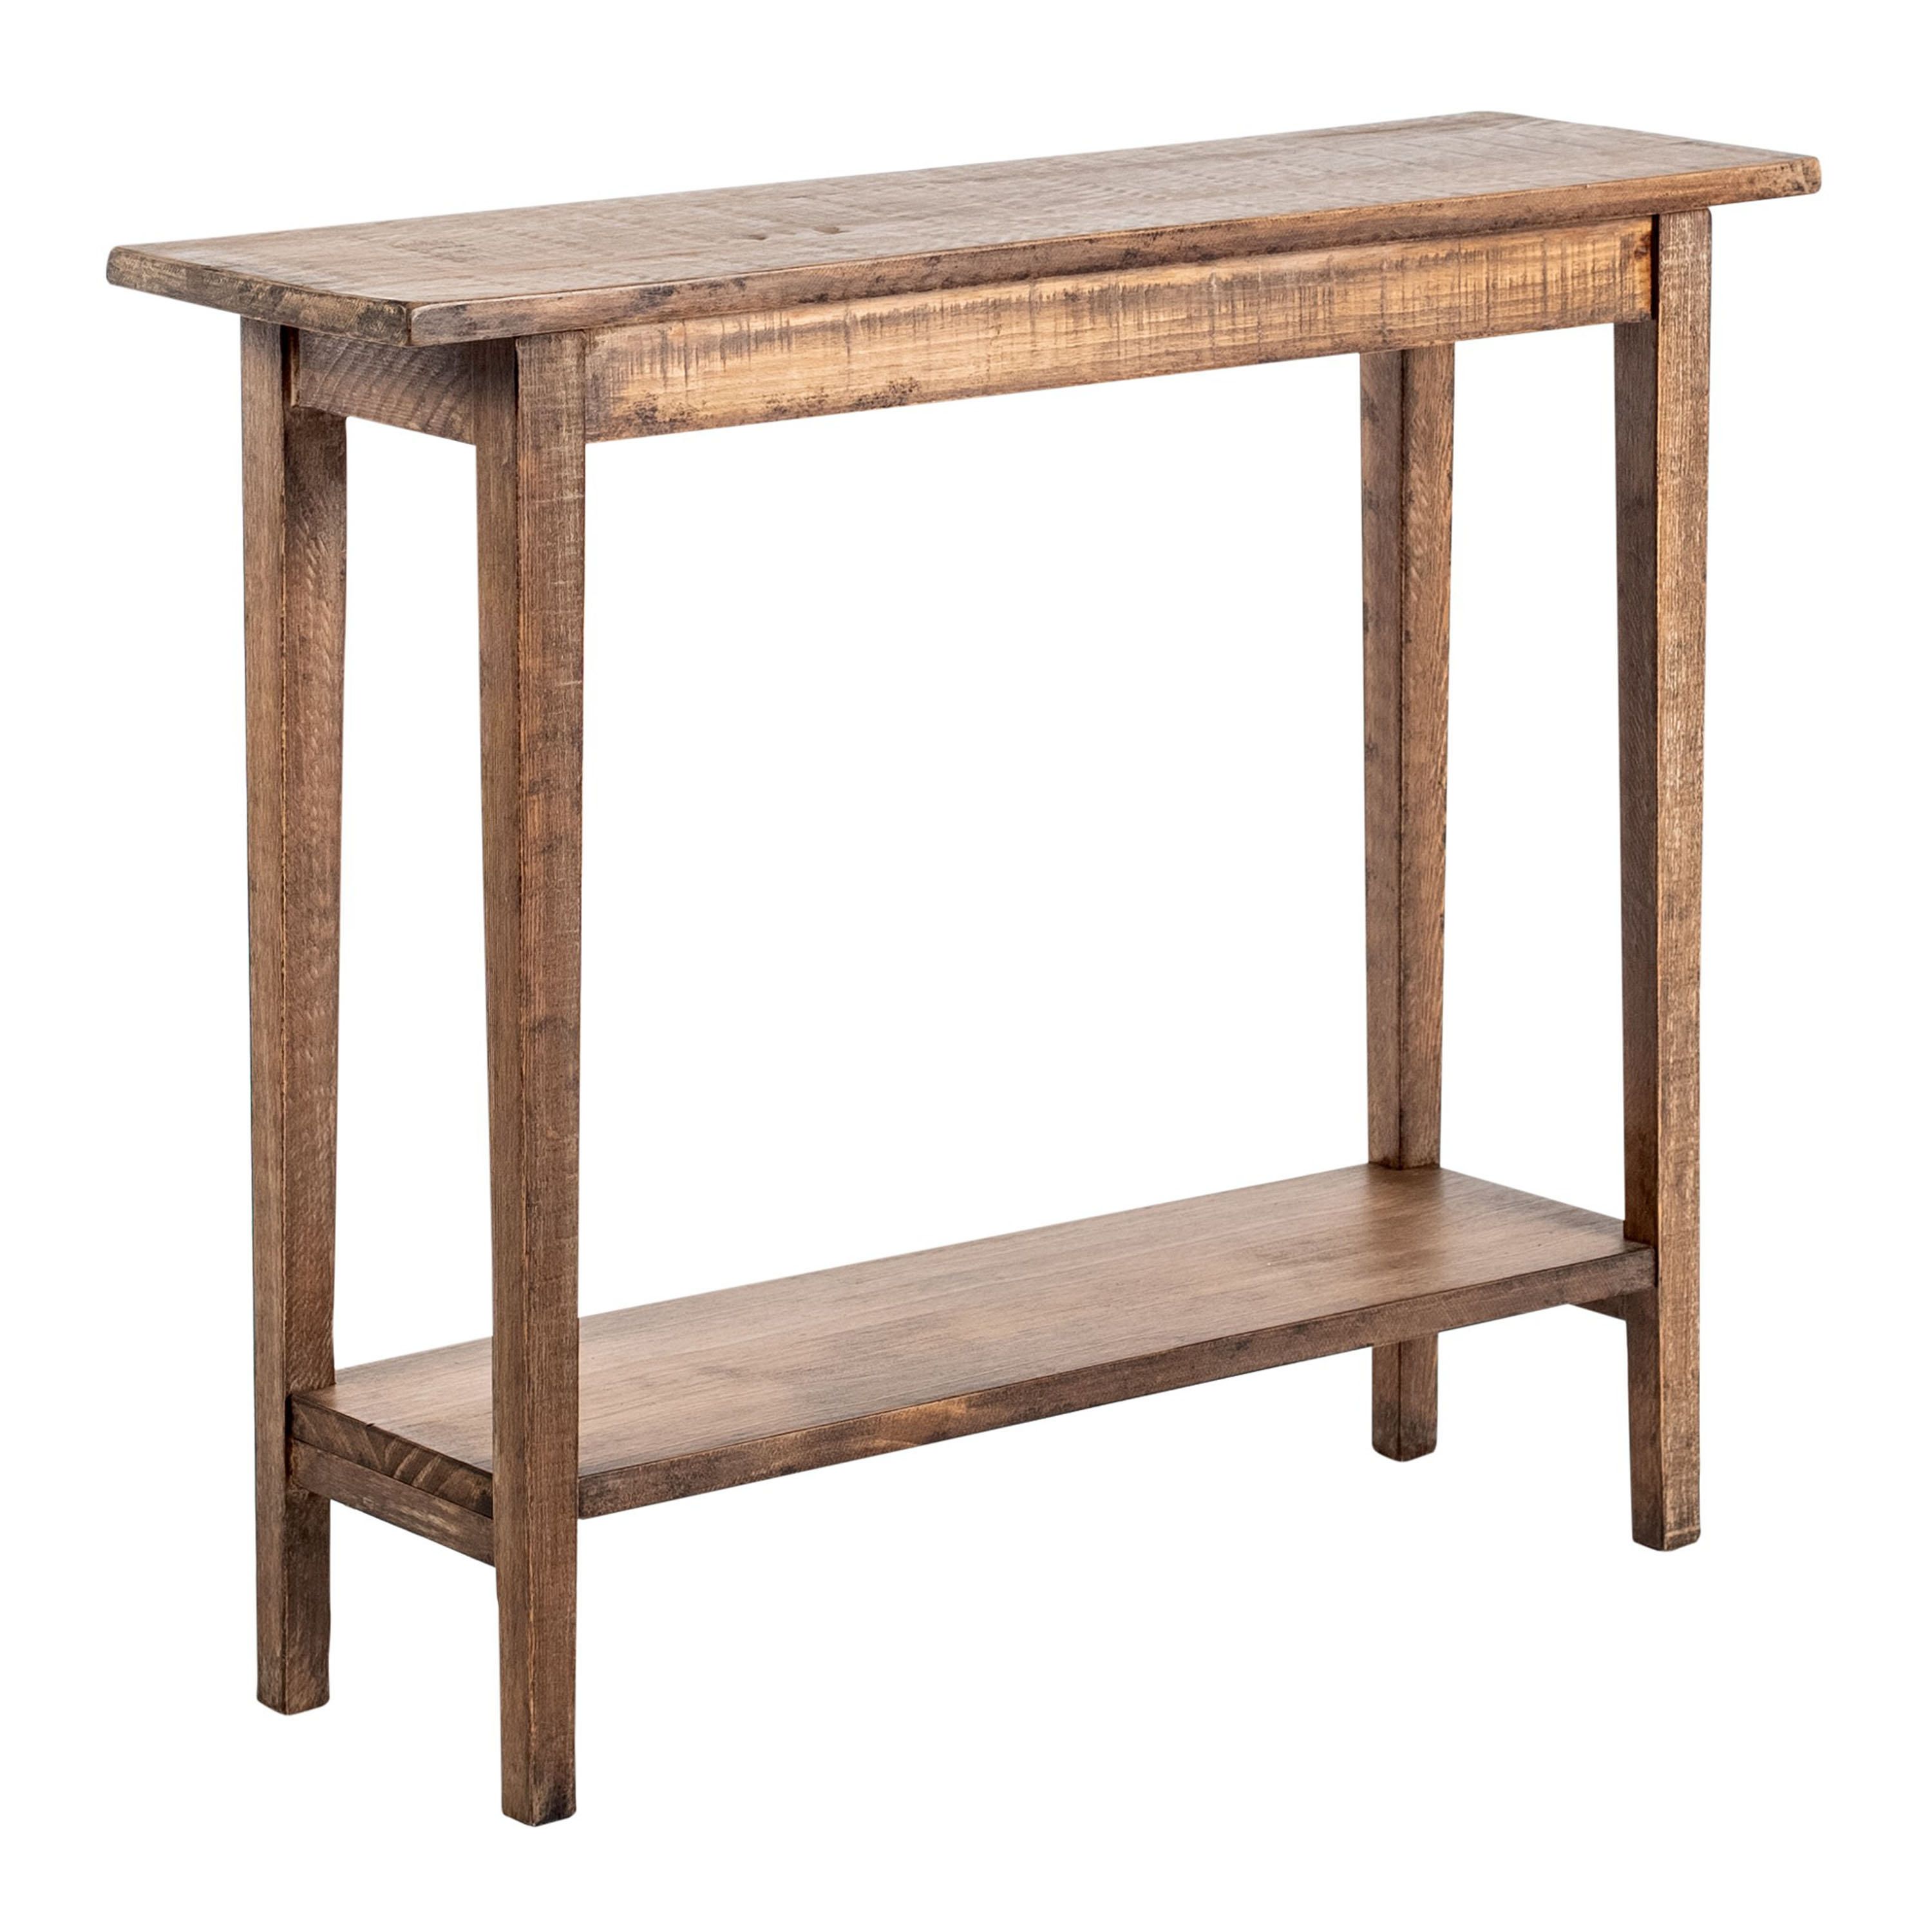 Odell Reclaimed Pine Farmhouse Console Table | World Market